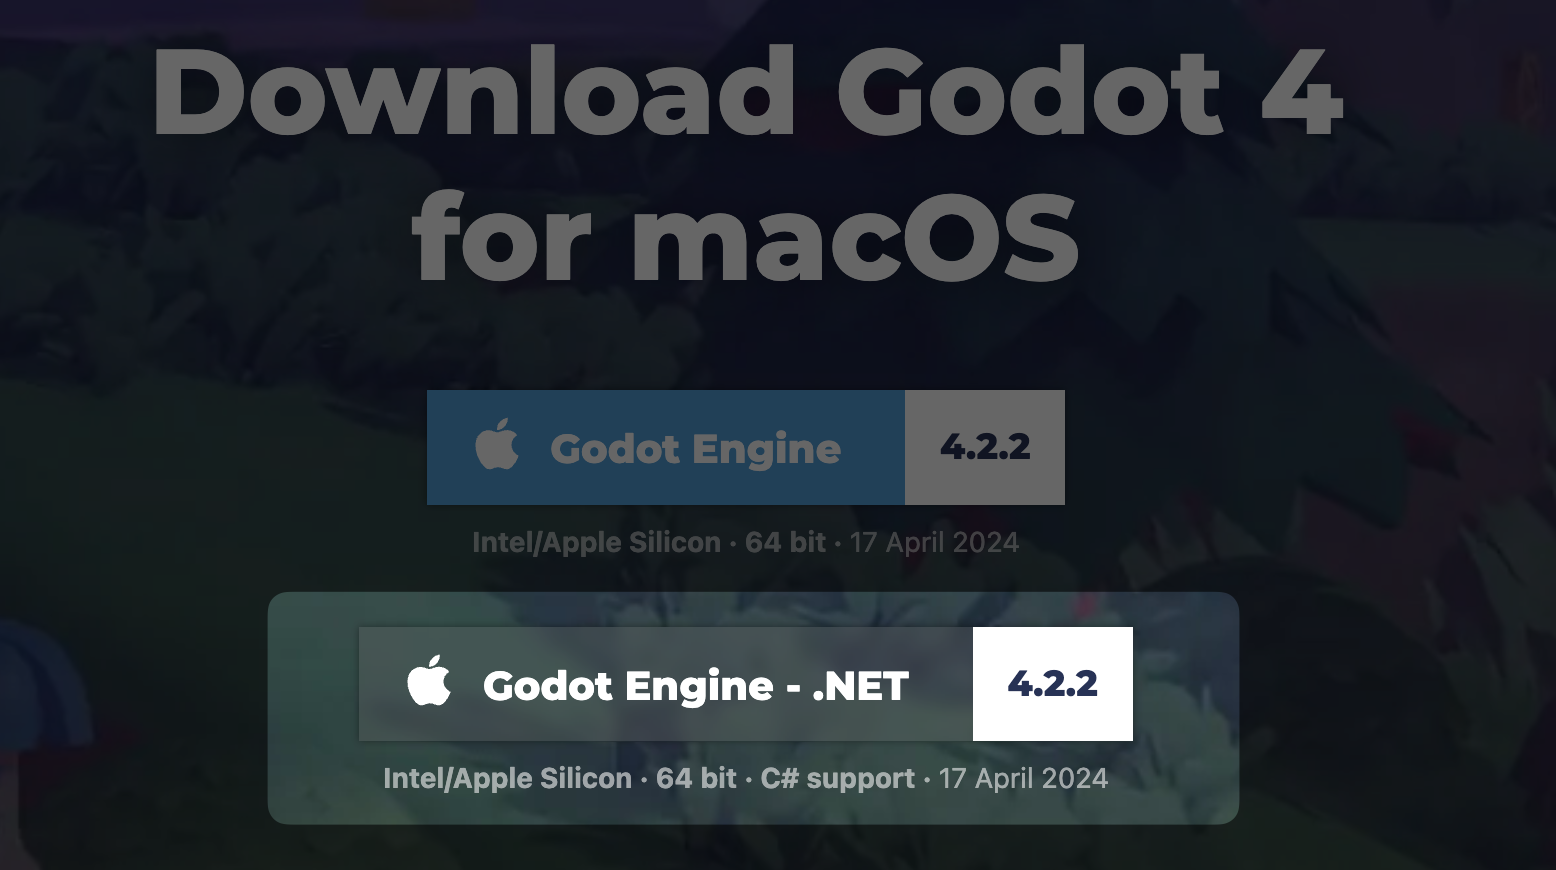 godot engine homepage with download